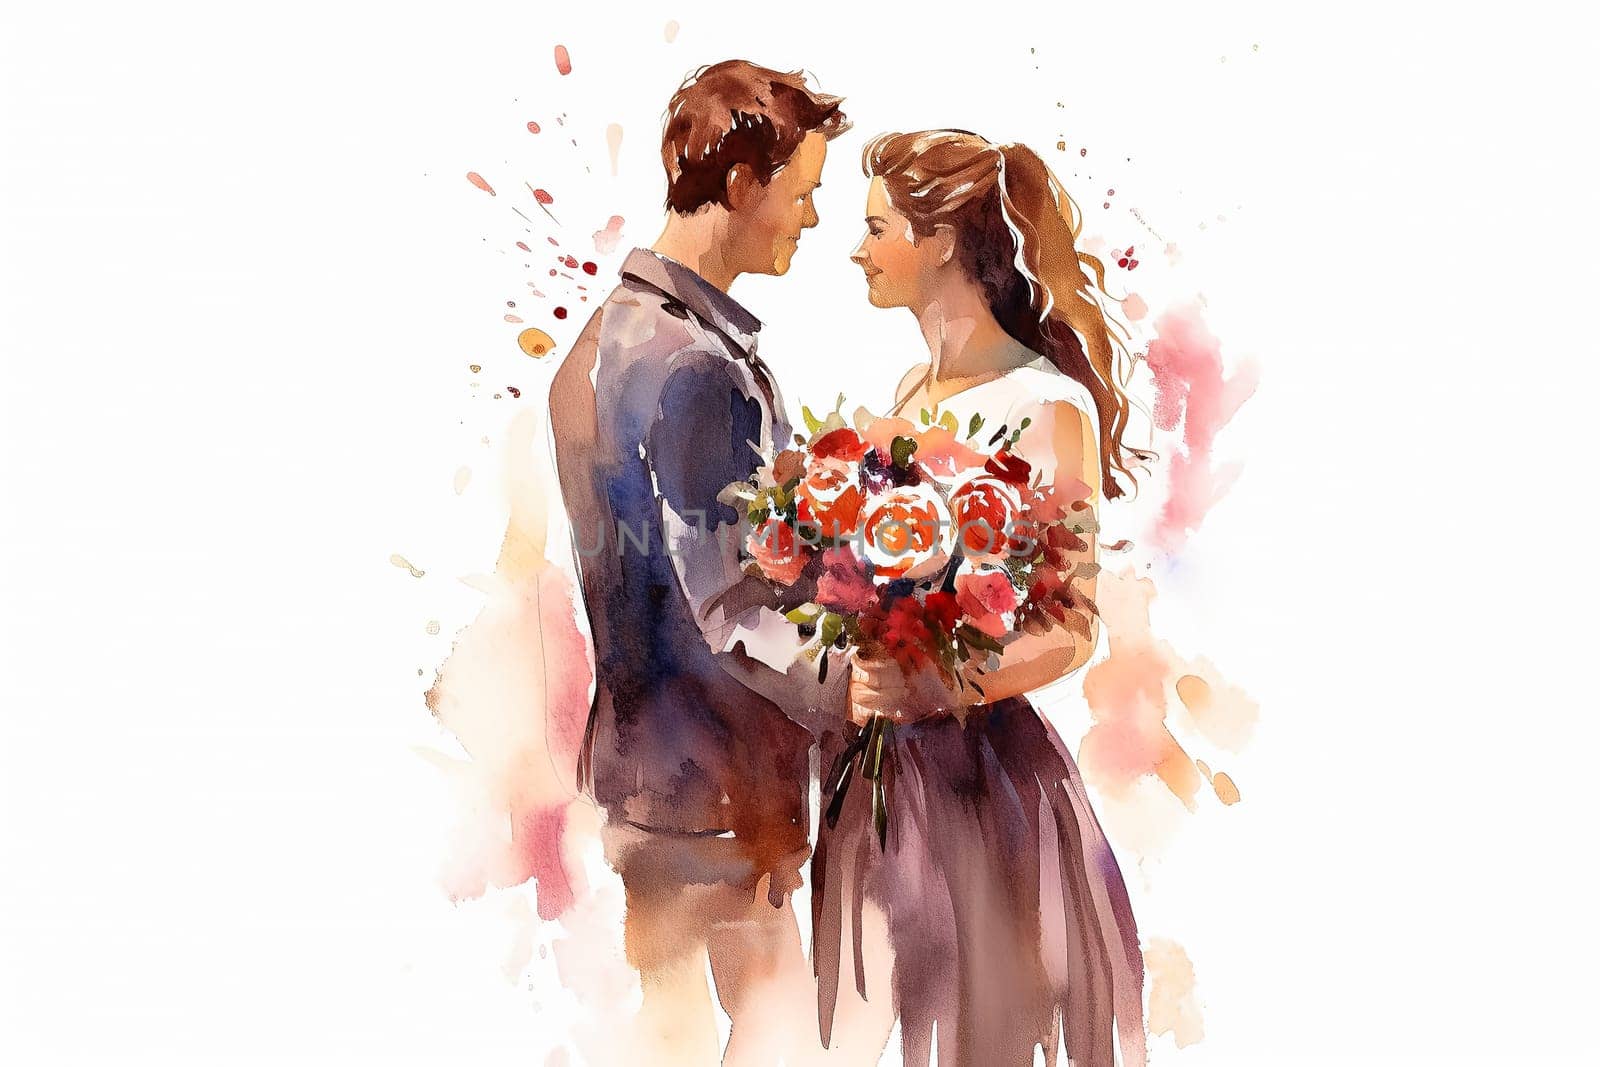 a watercolor illustration capturing the essence of a newlywed couple by Alla_Morozova93